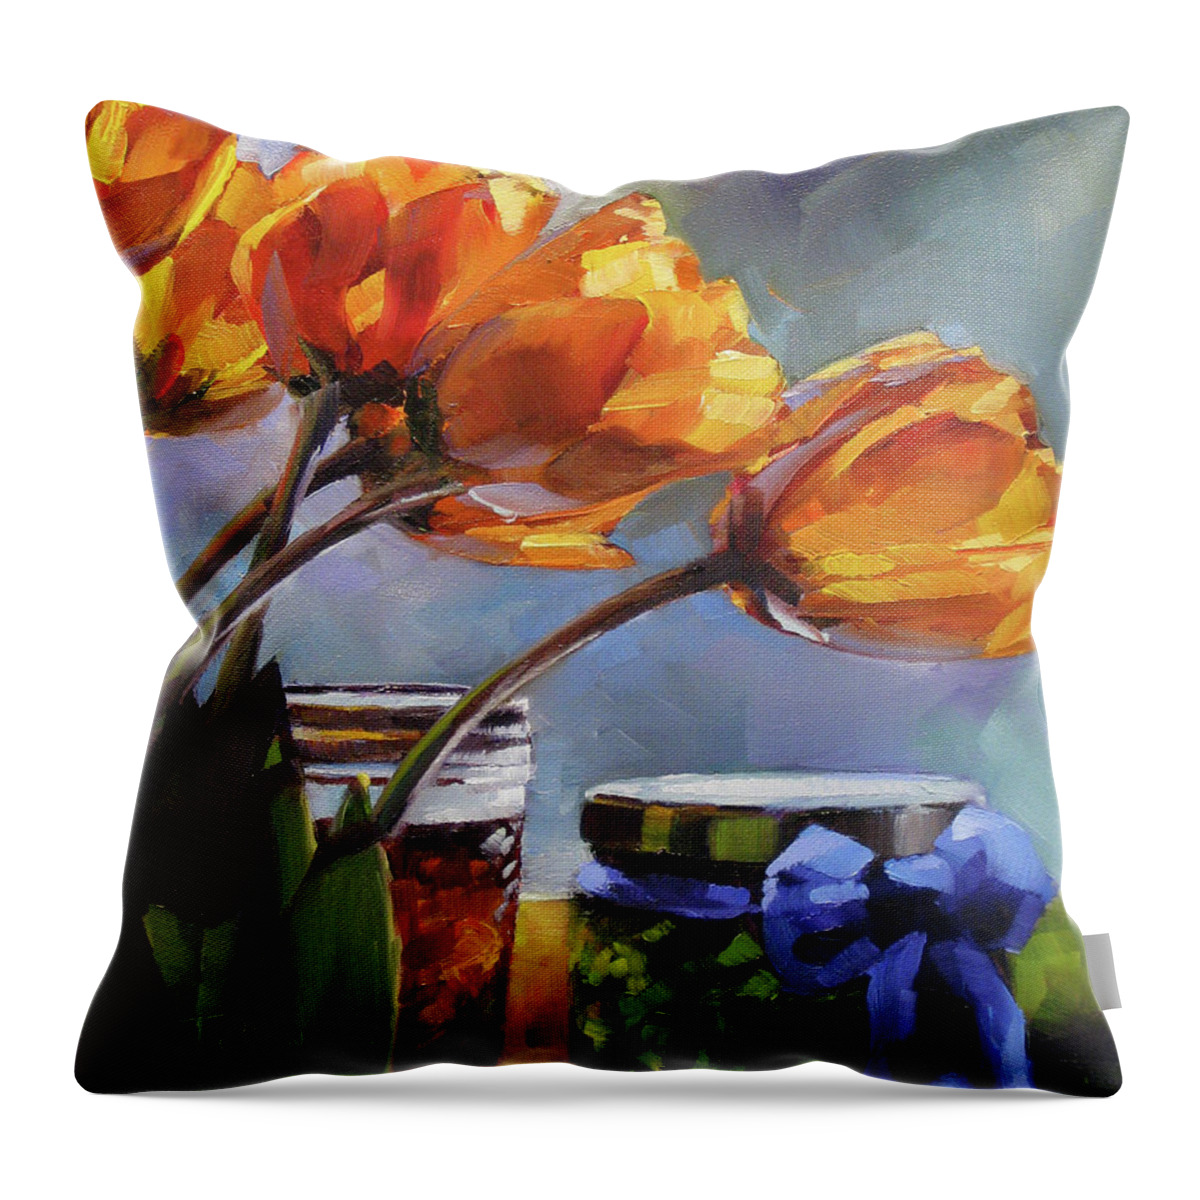 Tulips Throw Pillow featuring the painting Sunlit Jewels by Dianna Ponting